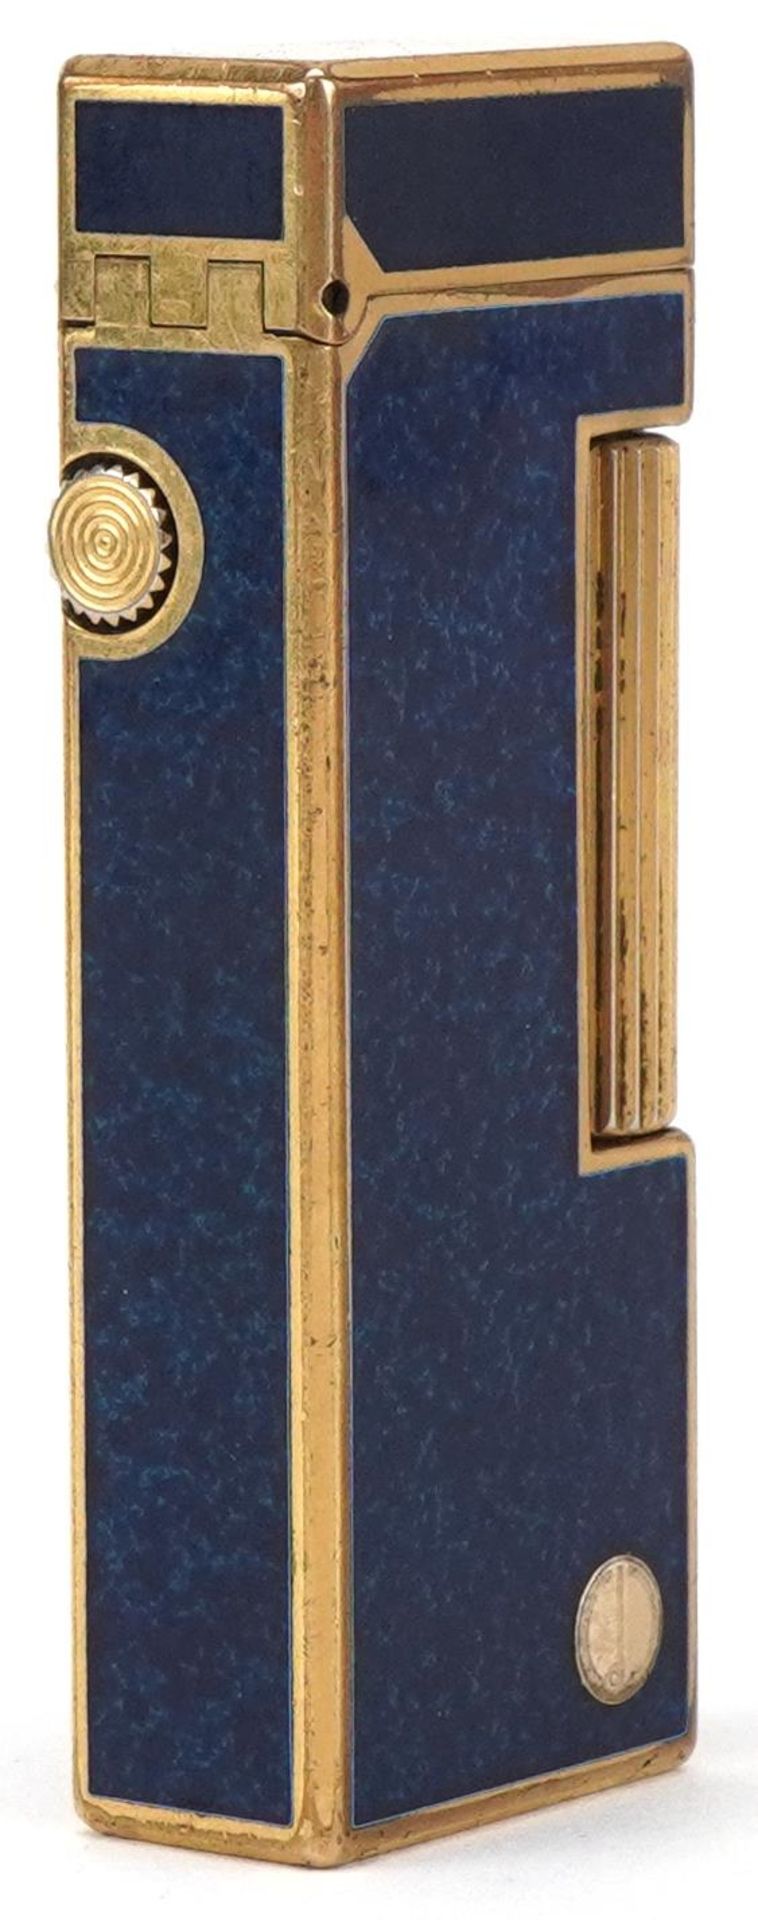 Vintage Dunhill gold plated lapis lazuli pocket lighter with case - Image 3 of 4